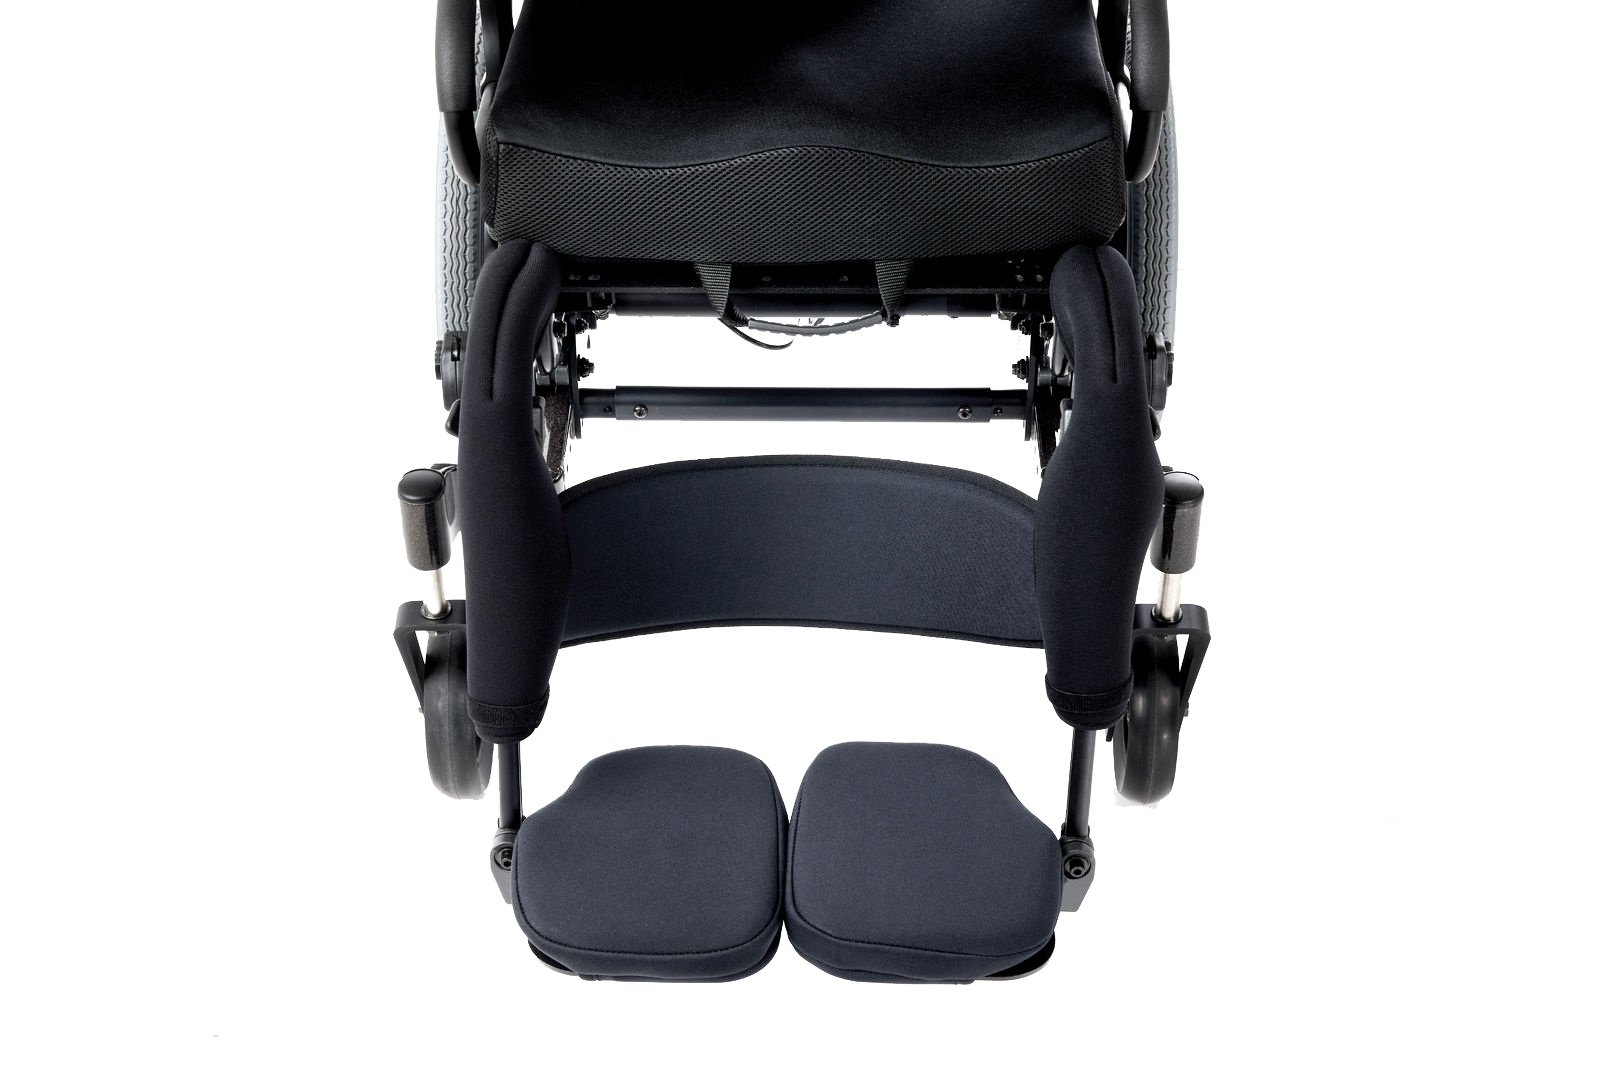 Spex Calf Supports - Spex Seating Global : Spex Seating Global